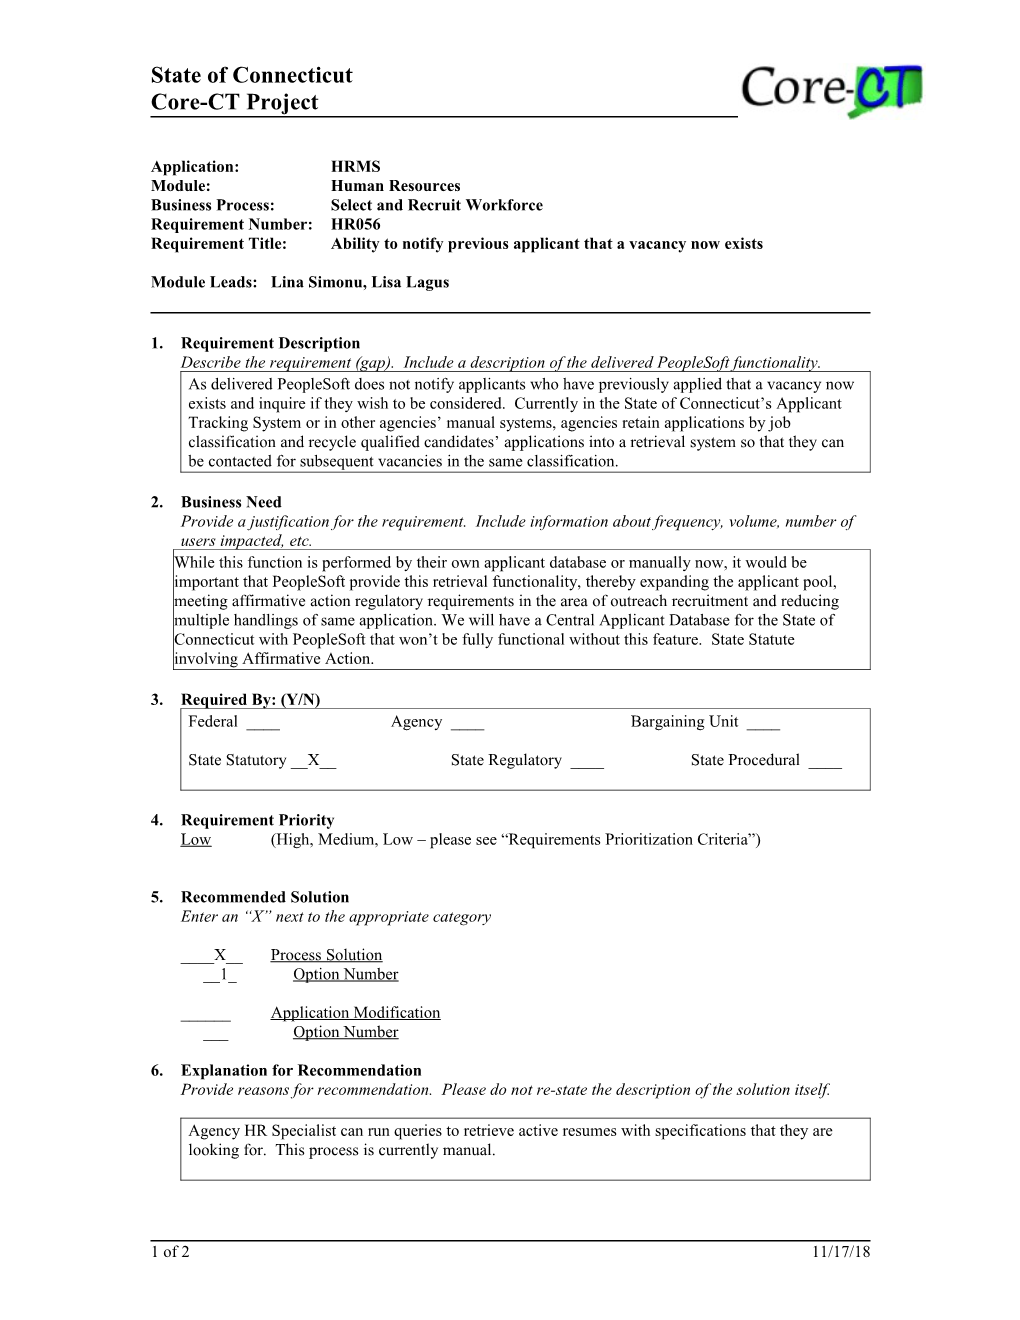 HR056 Email Prev Applicant That Vacancy Exists